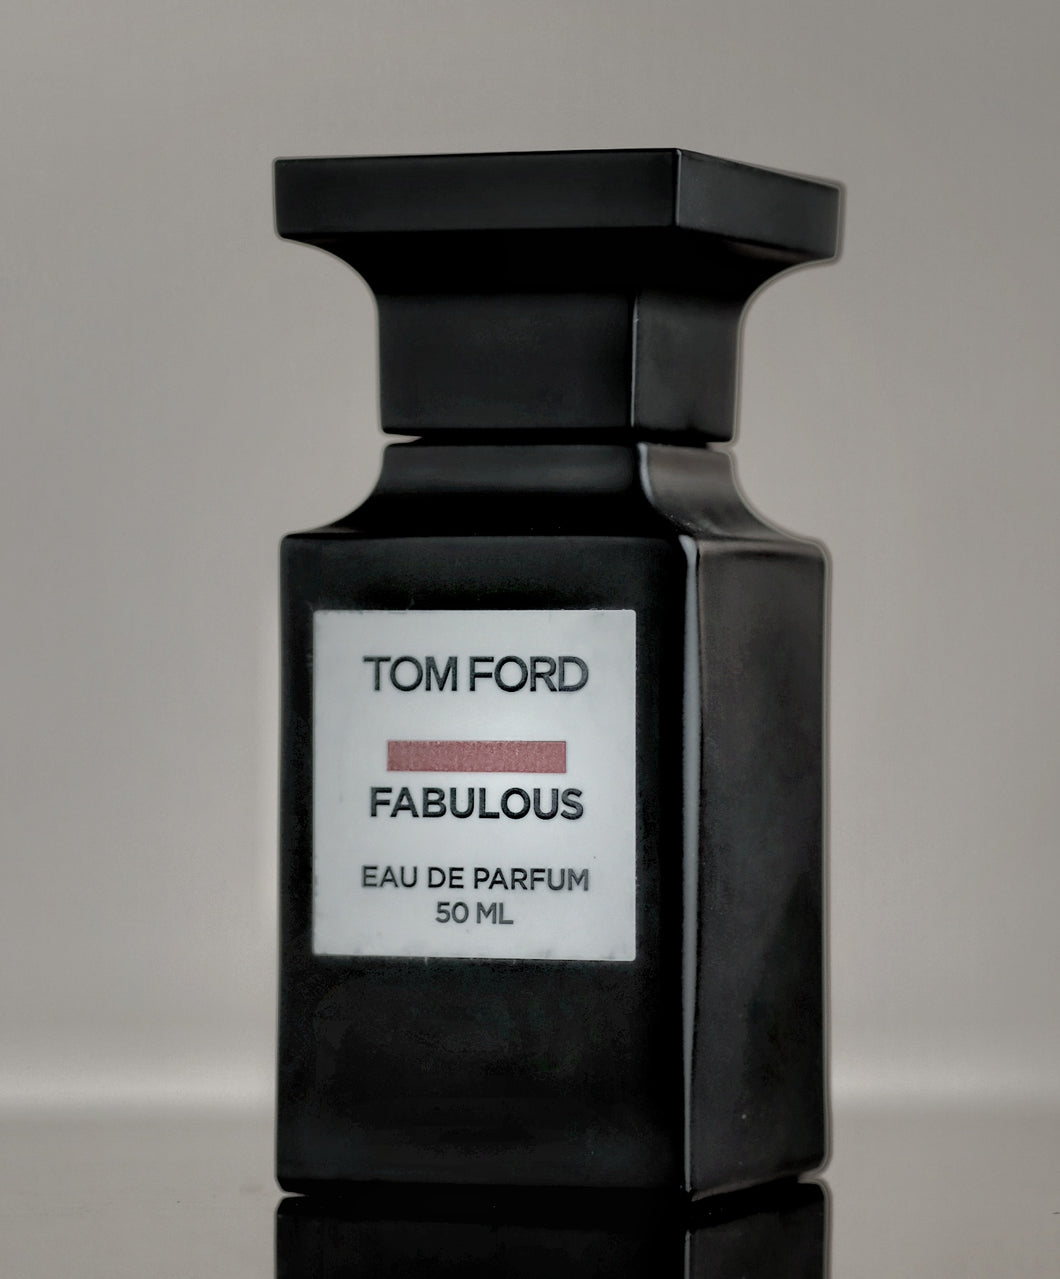 Tom Ford Tobacco Vanille Authentic Glass Travel Sample 